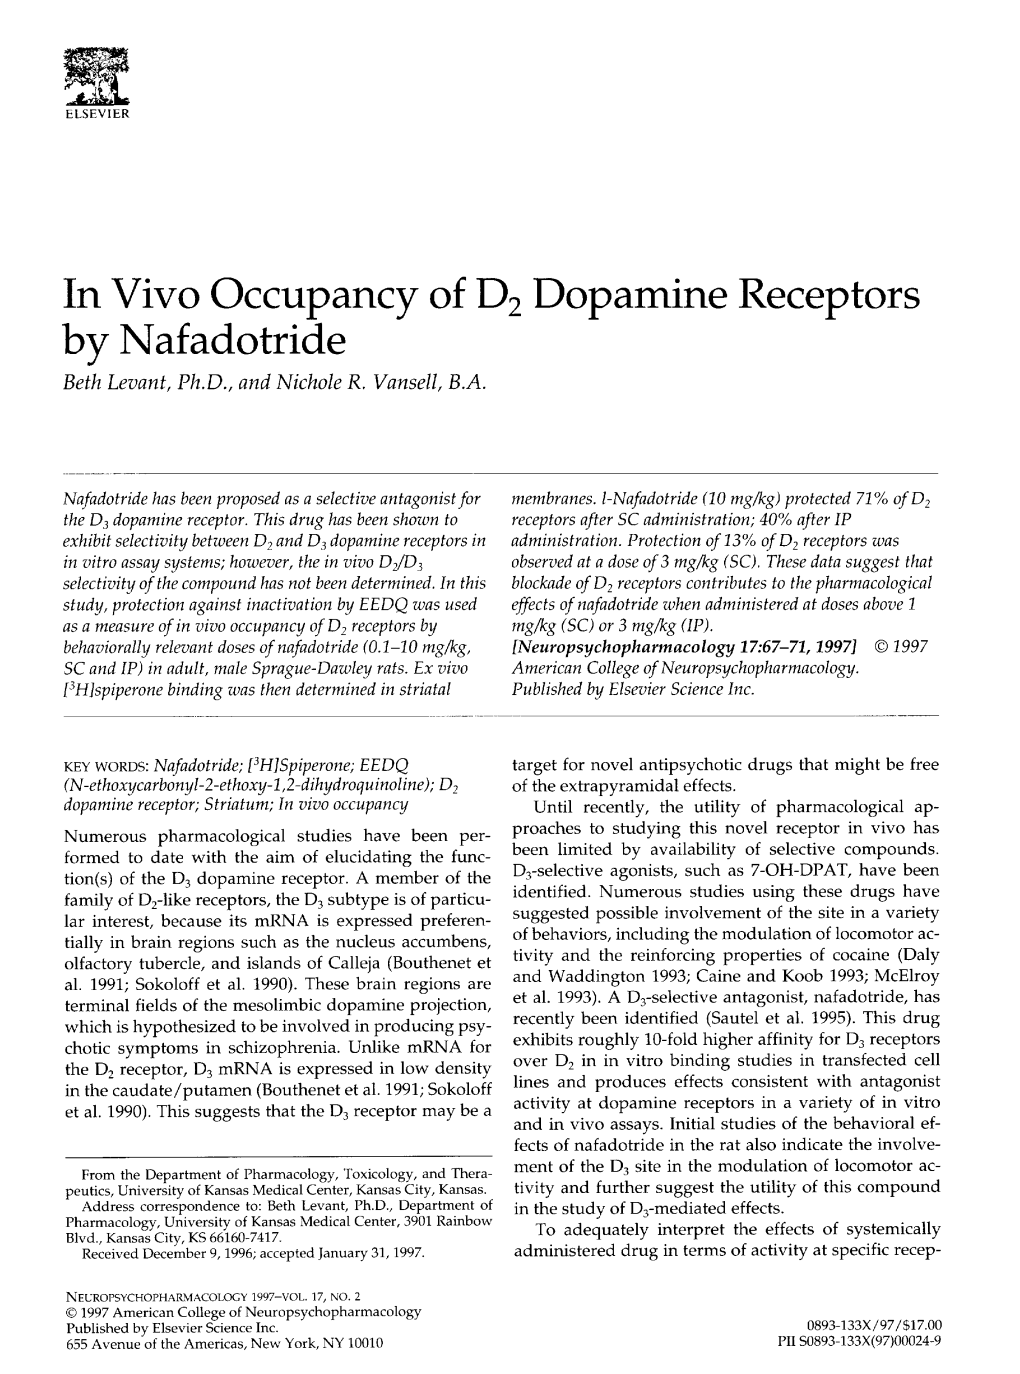 In Vivo Occupancy of D2 Dopamine Receptors by N Afadotride Beth Levant, Ph.D., and Nichole R